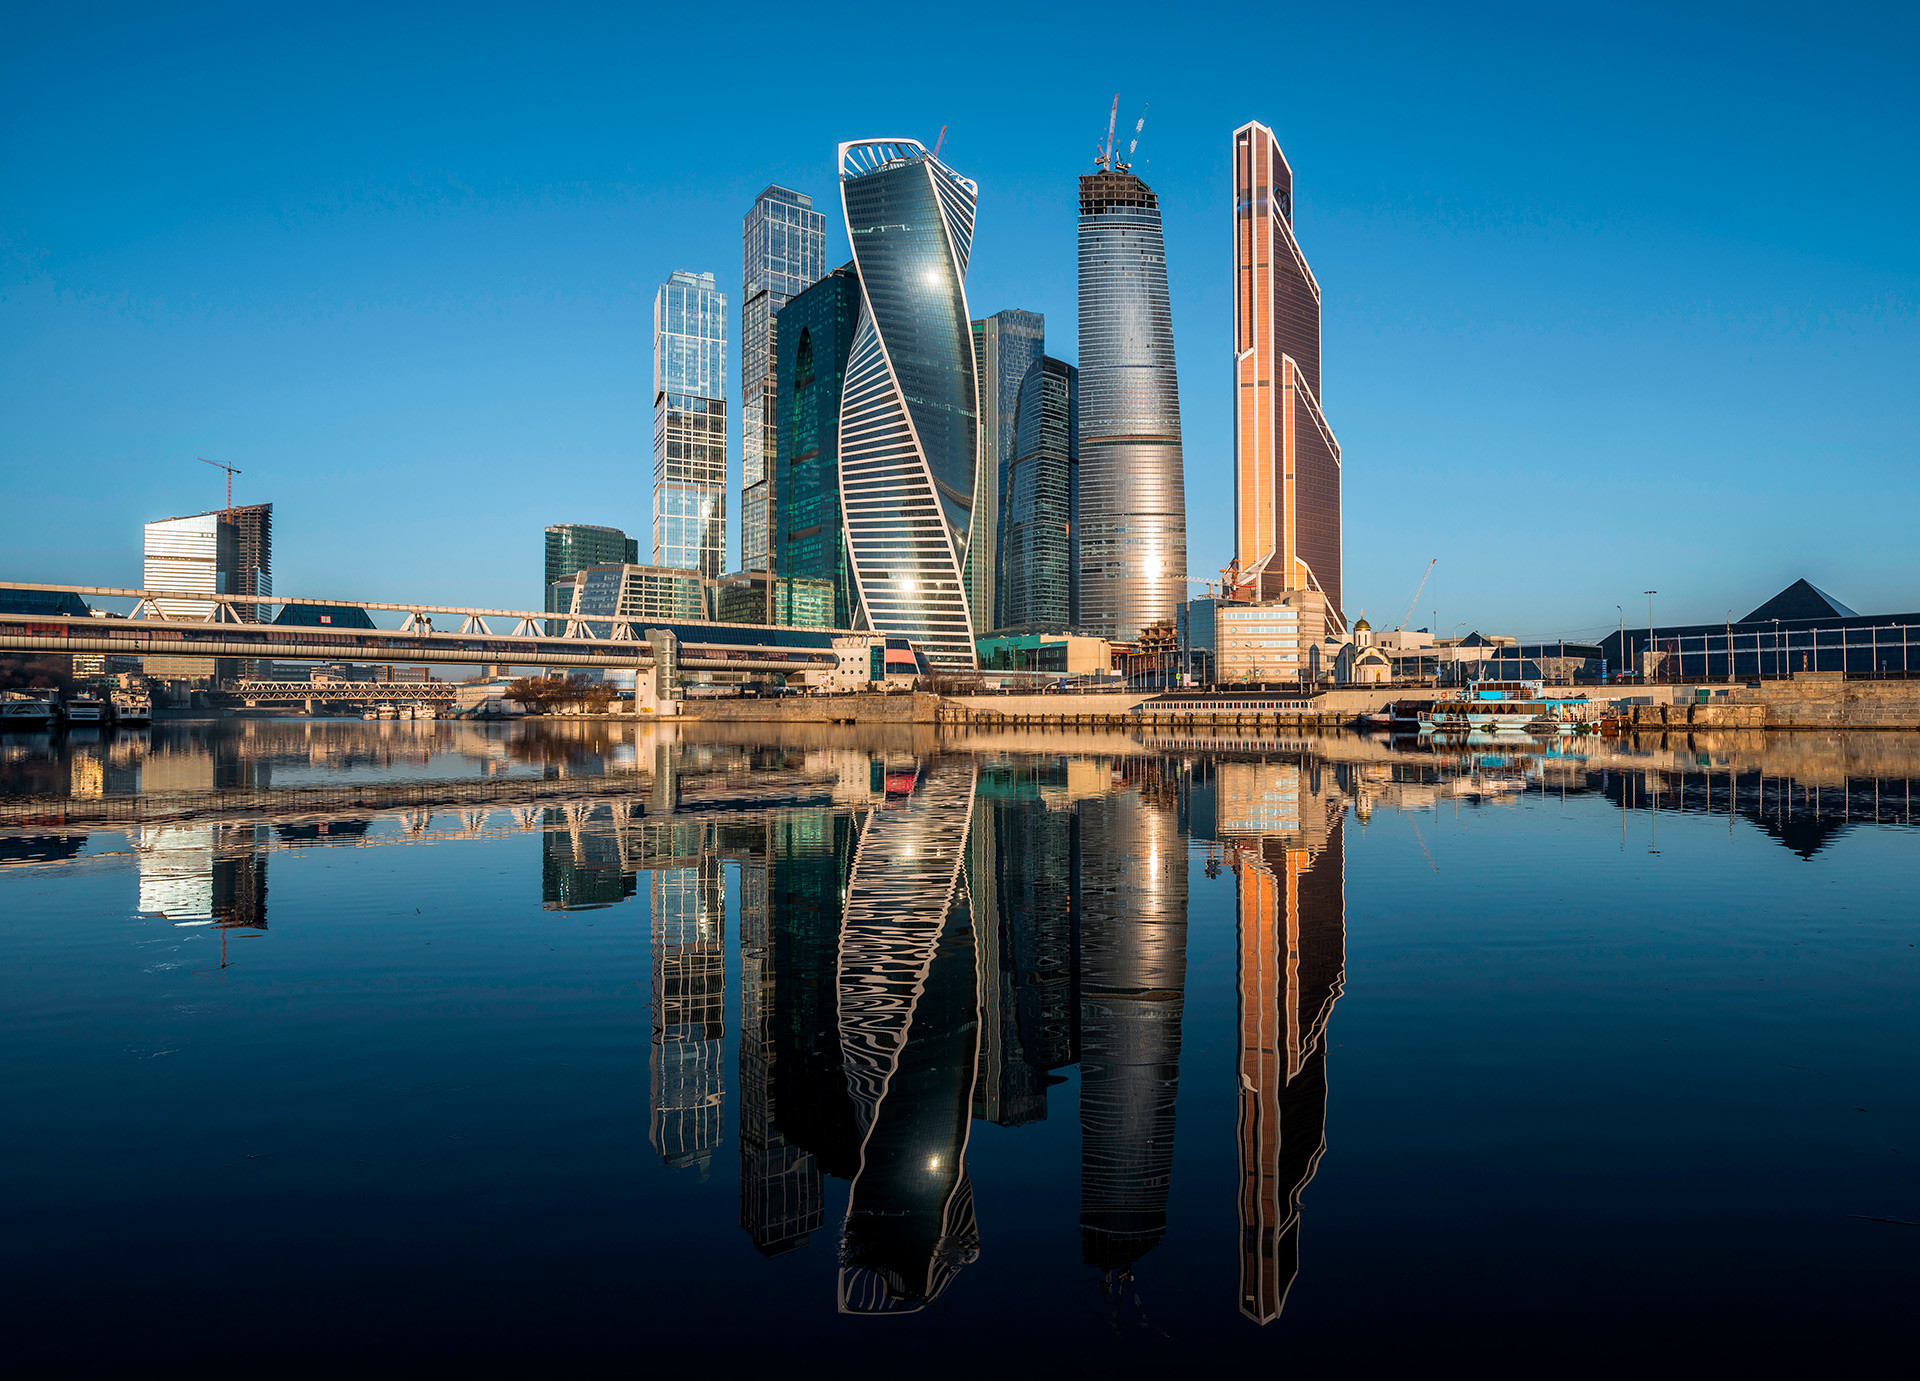 The Moscow International Business Center.